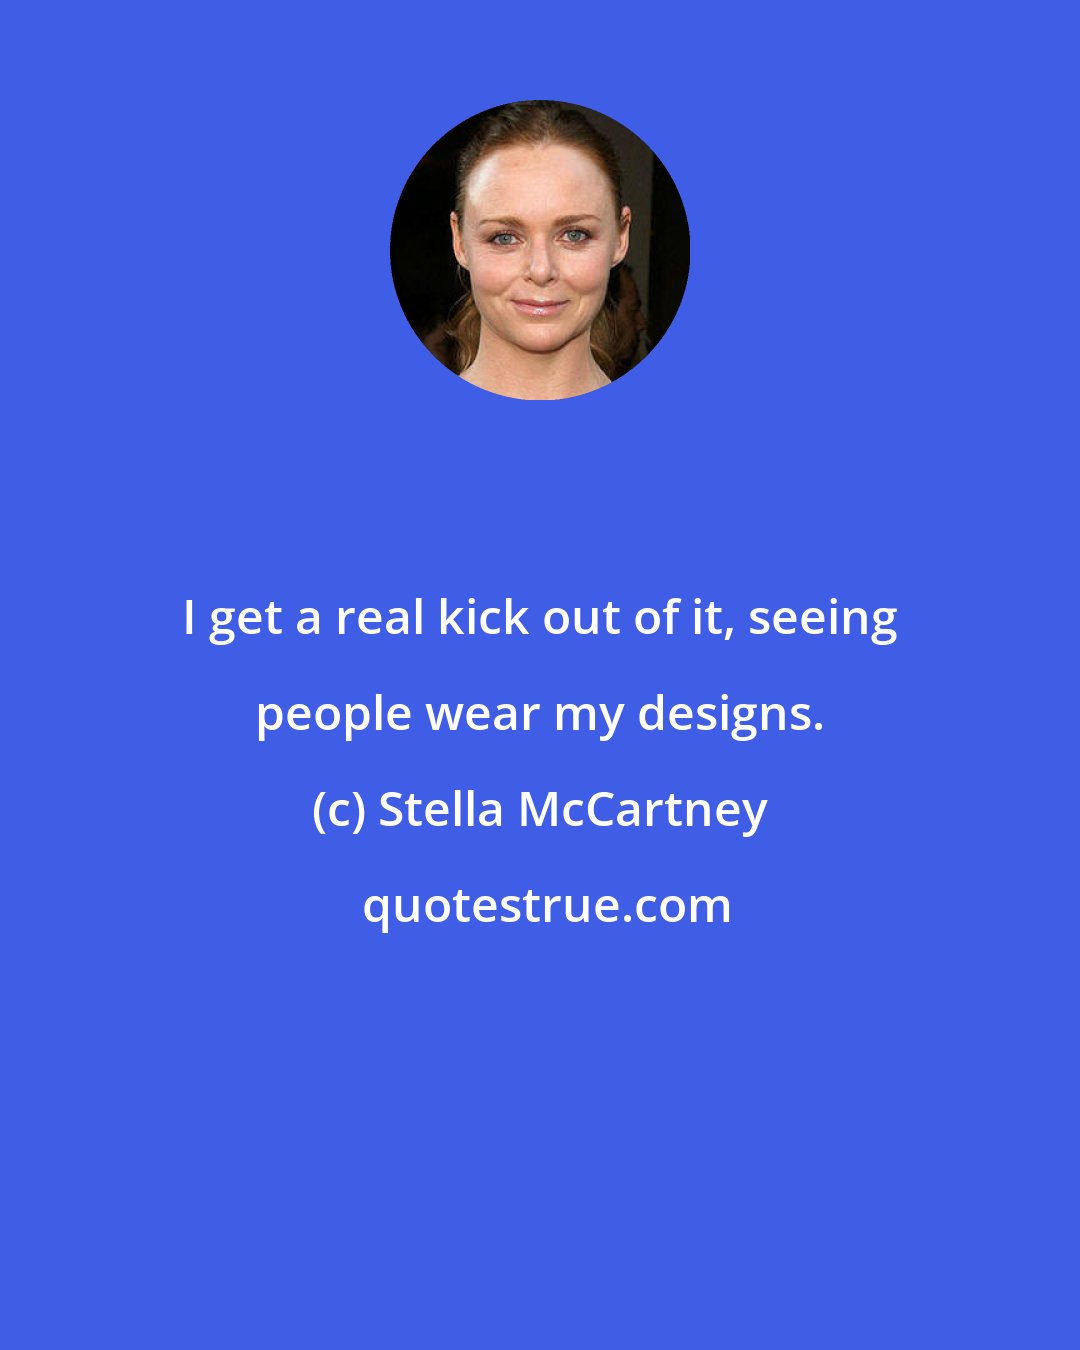 Stella McCartney: I get a real kick out of it, seeing people wear my designs.